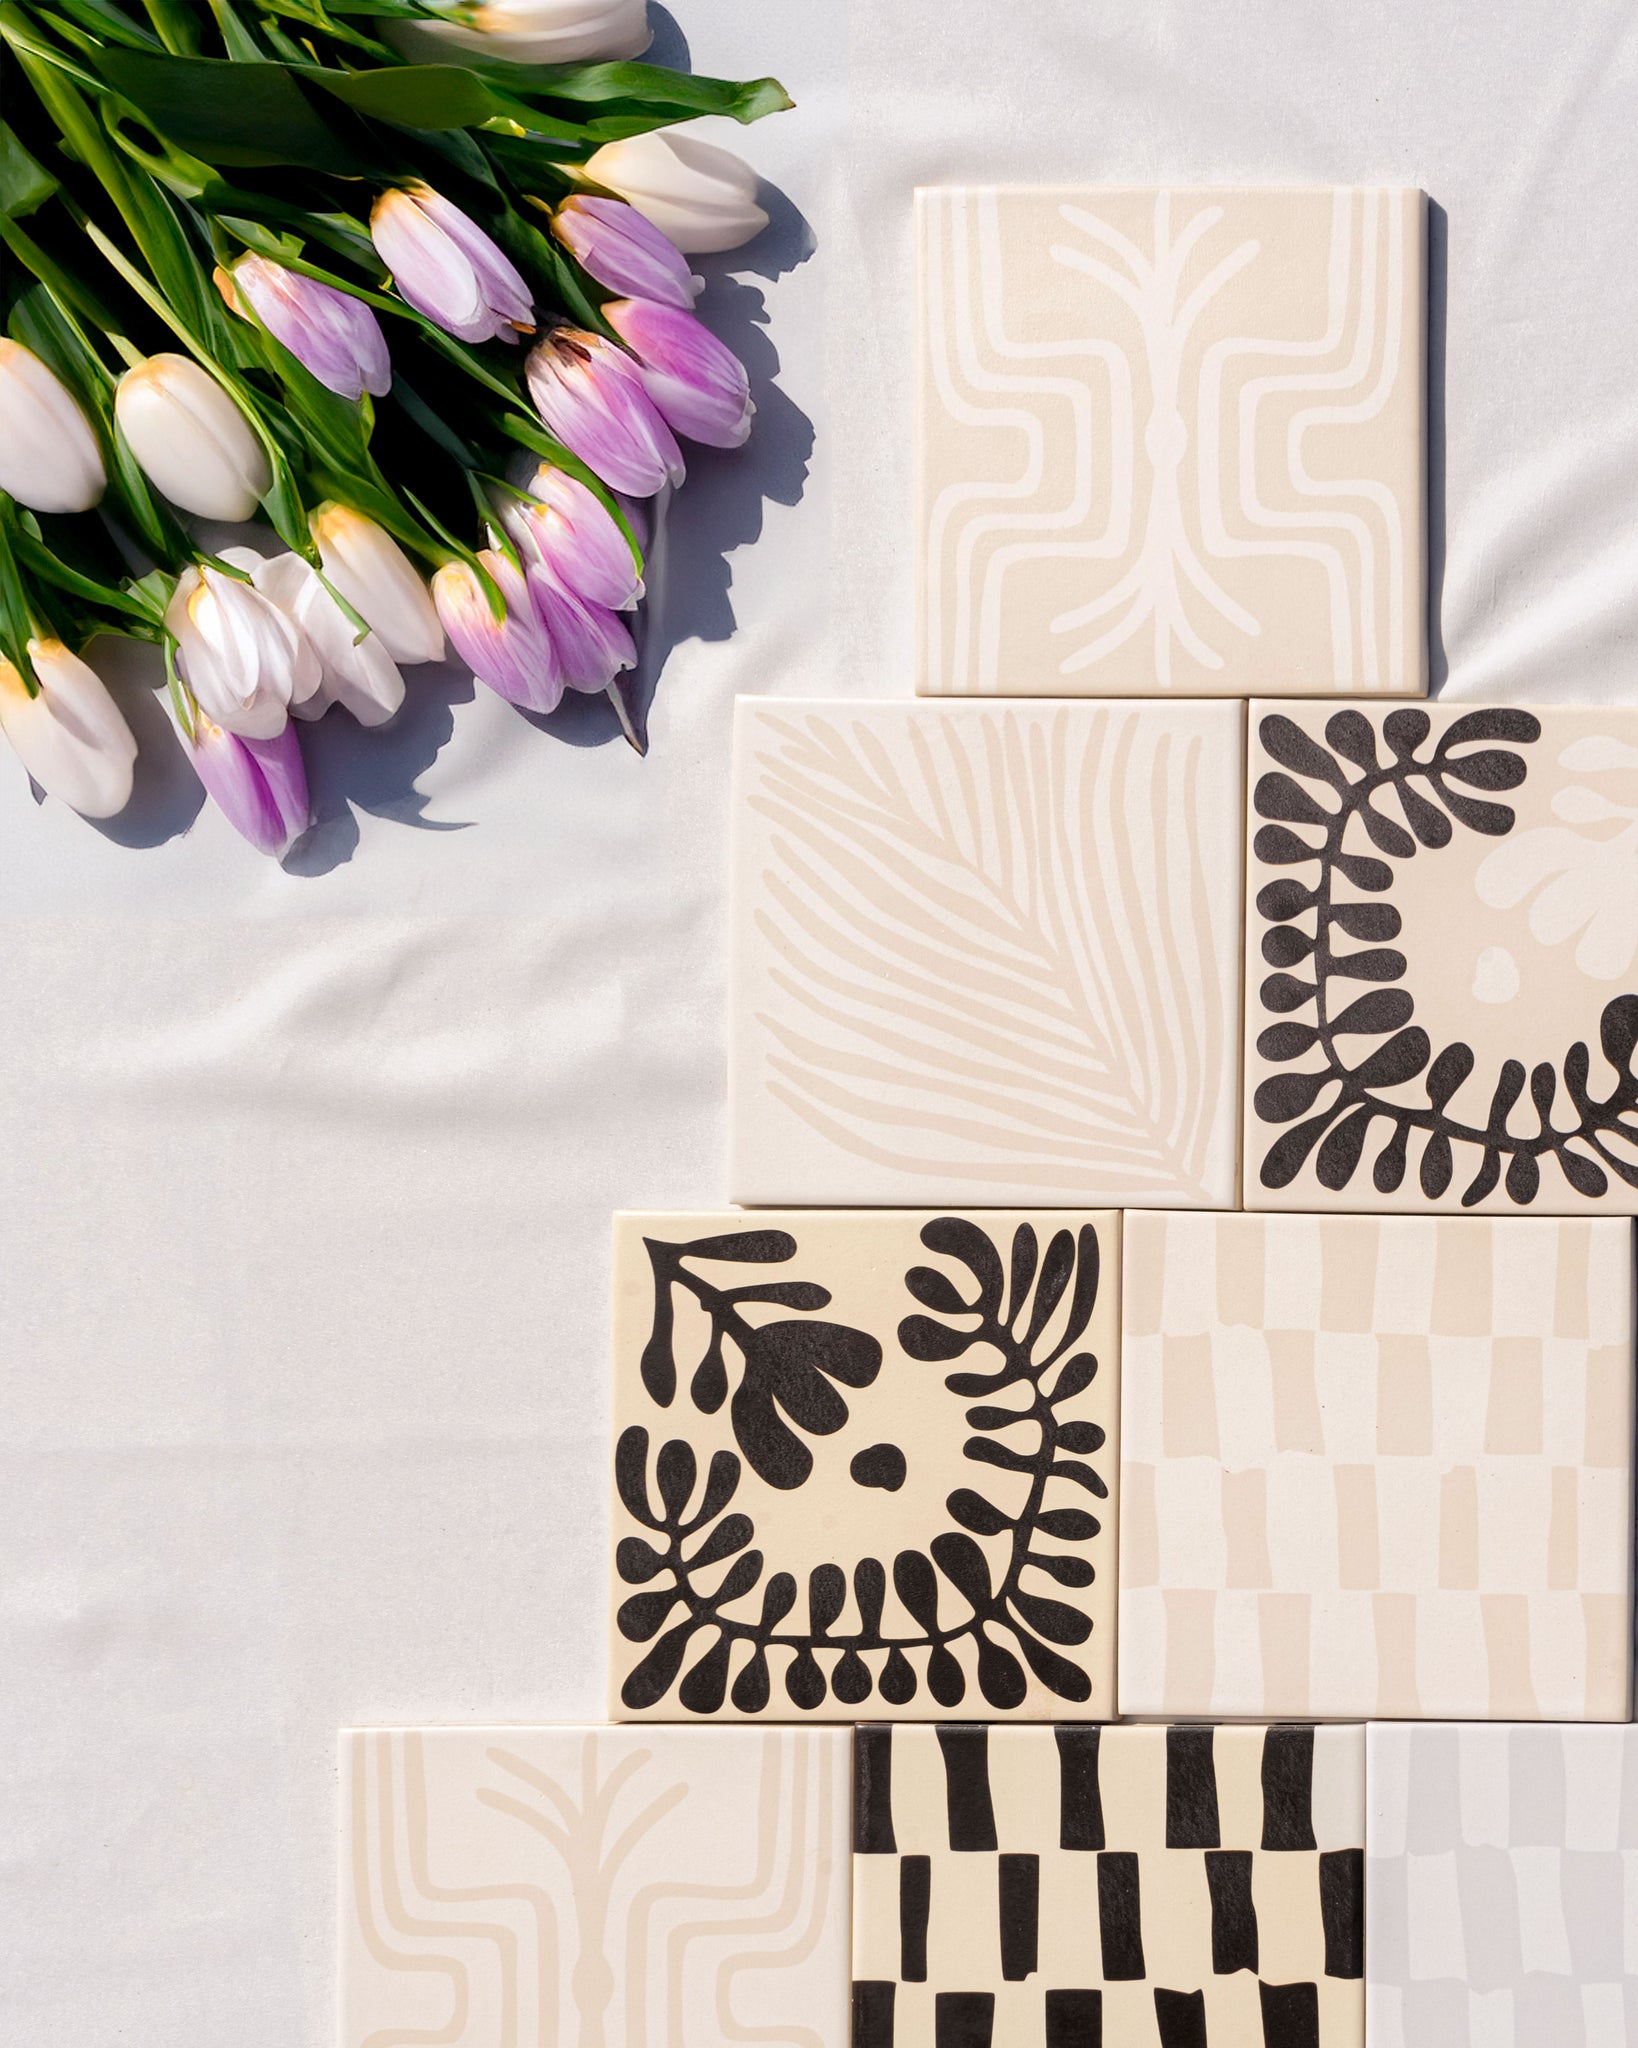 Black and white patterned tiles by Clay Imports